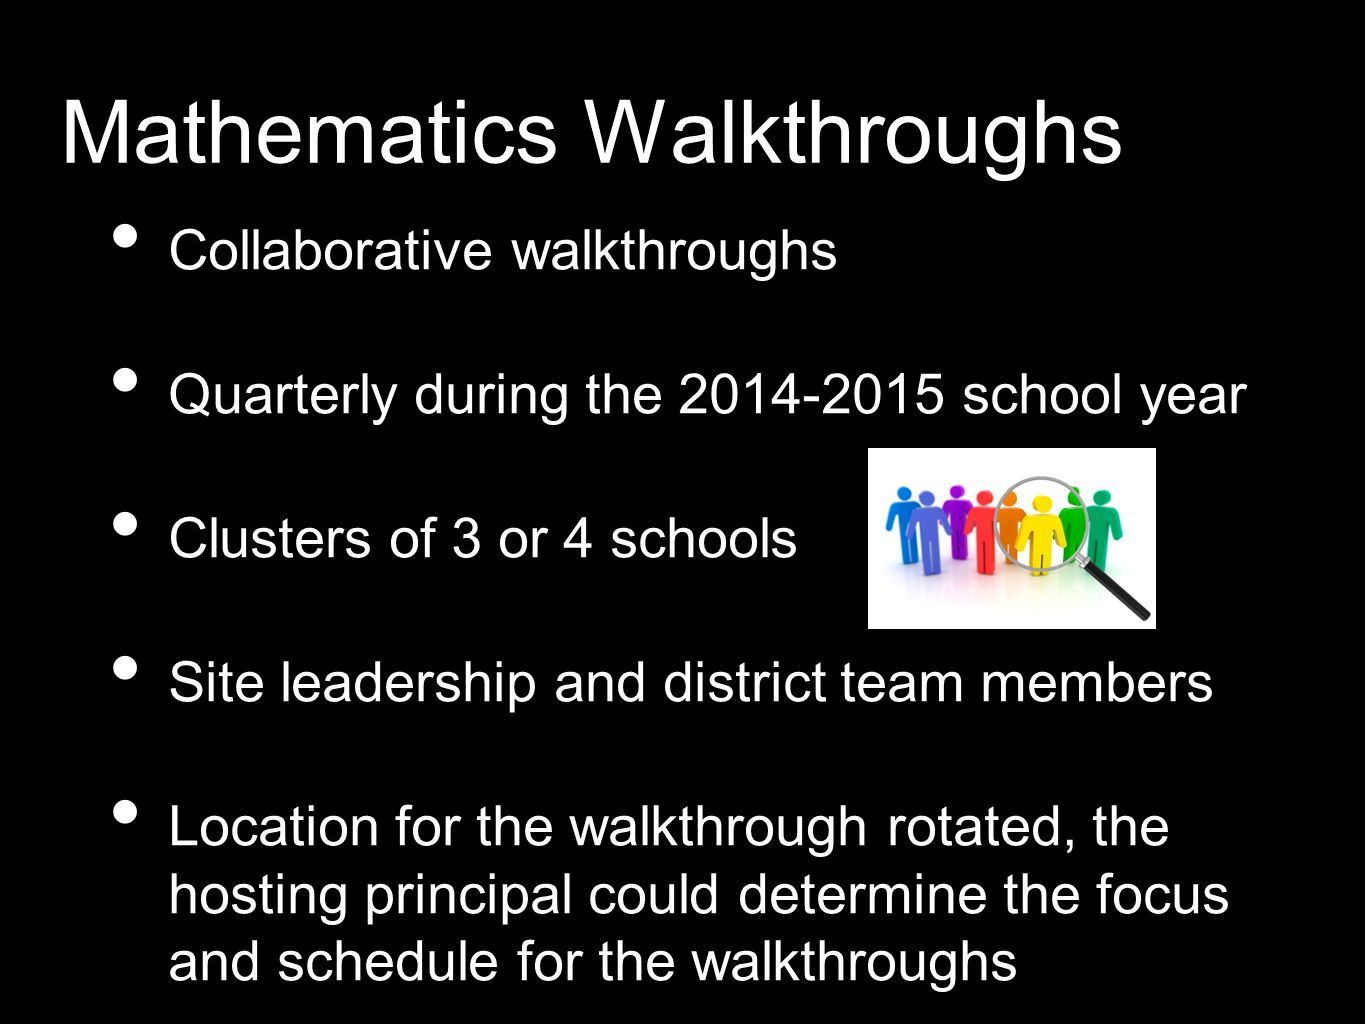 Mathematics Walkthroughs Collaborative walkthroughs Quarterly during the school year Clusters of 3 or 4 schools Site leadership and district team members Location for the walkthrough rotated, the hosting principal could determine the focus and schedule for the walkthroughs